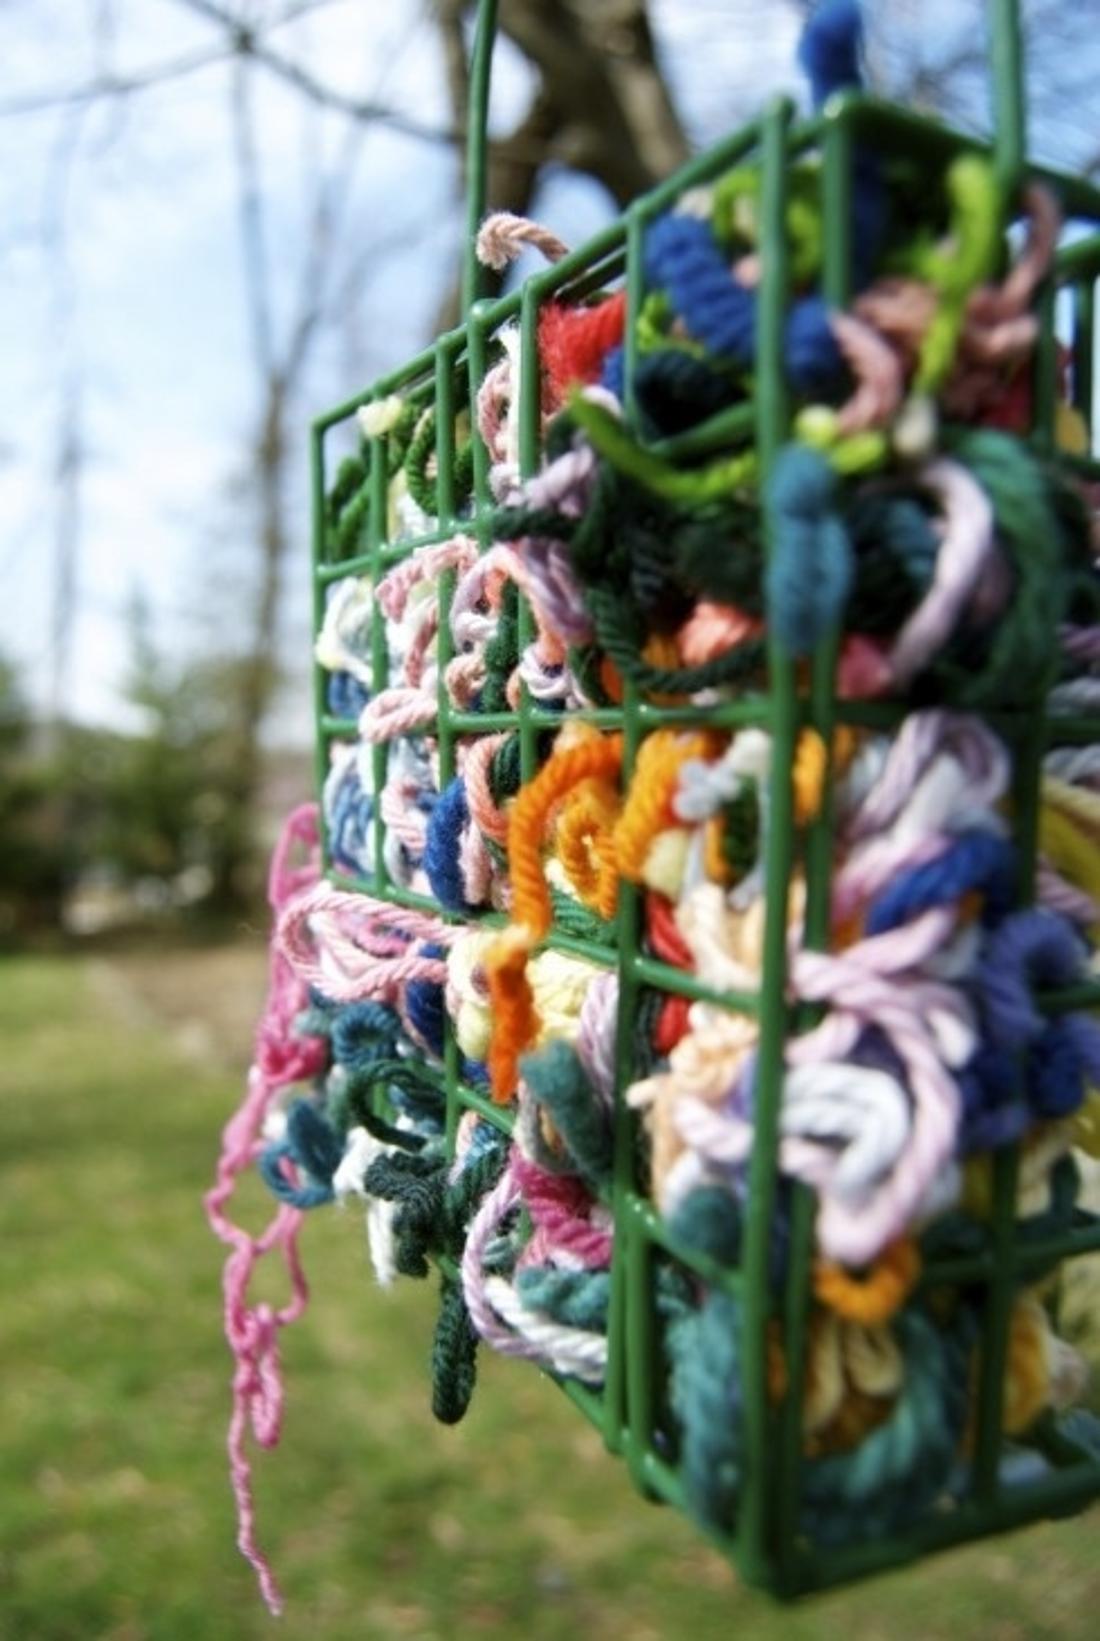 Place scraps of yarn in a suet feeder, and birds will use them to make their nests.